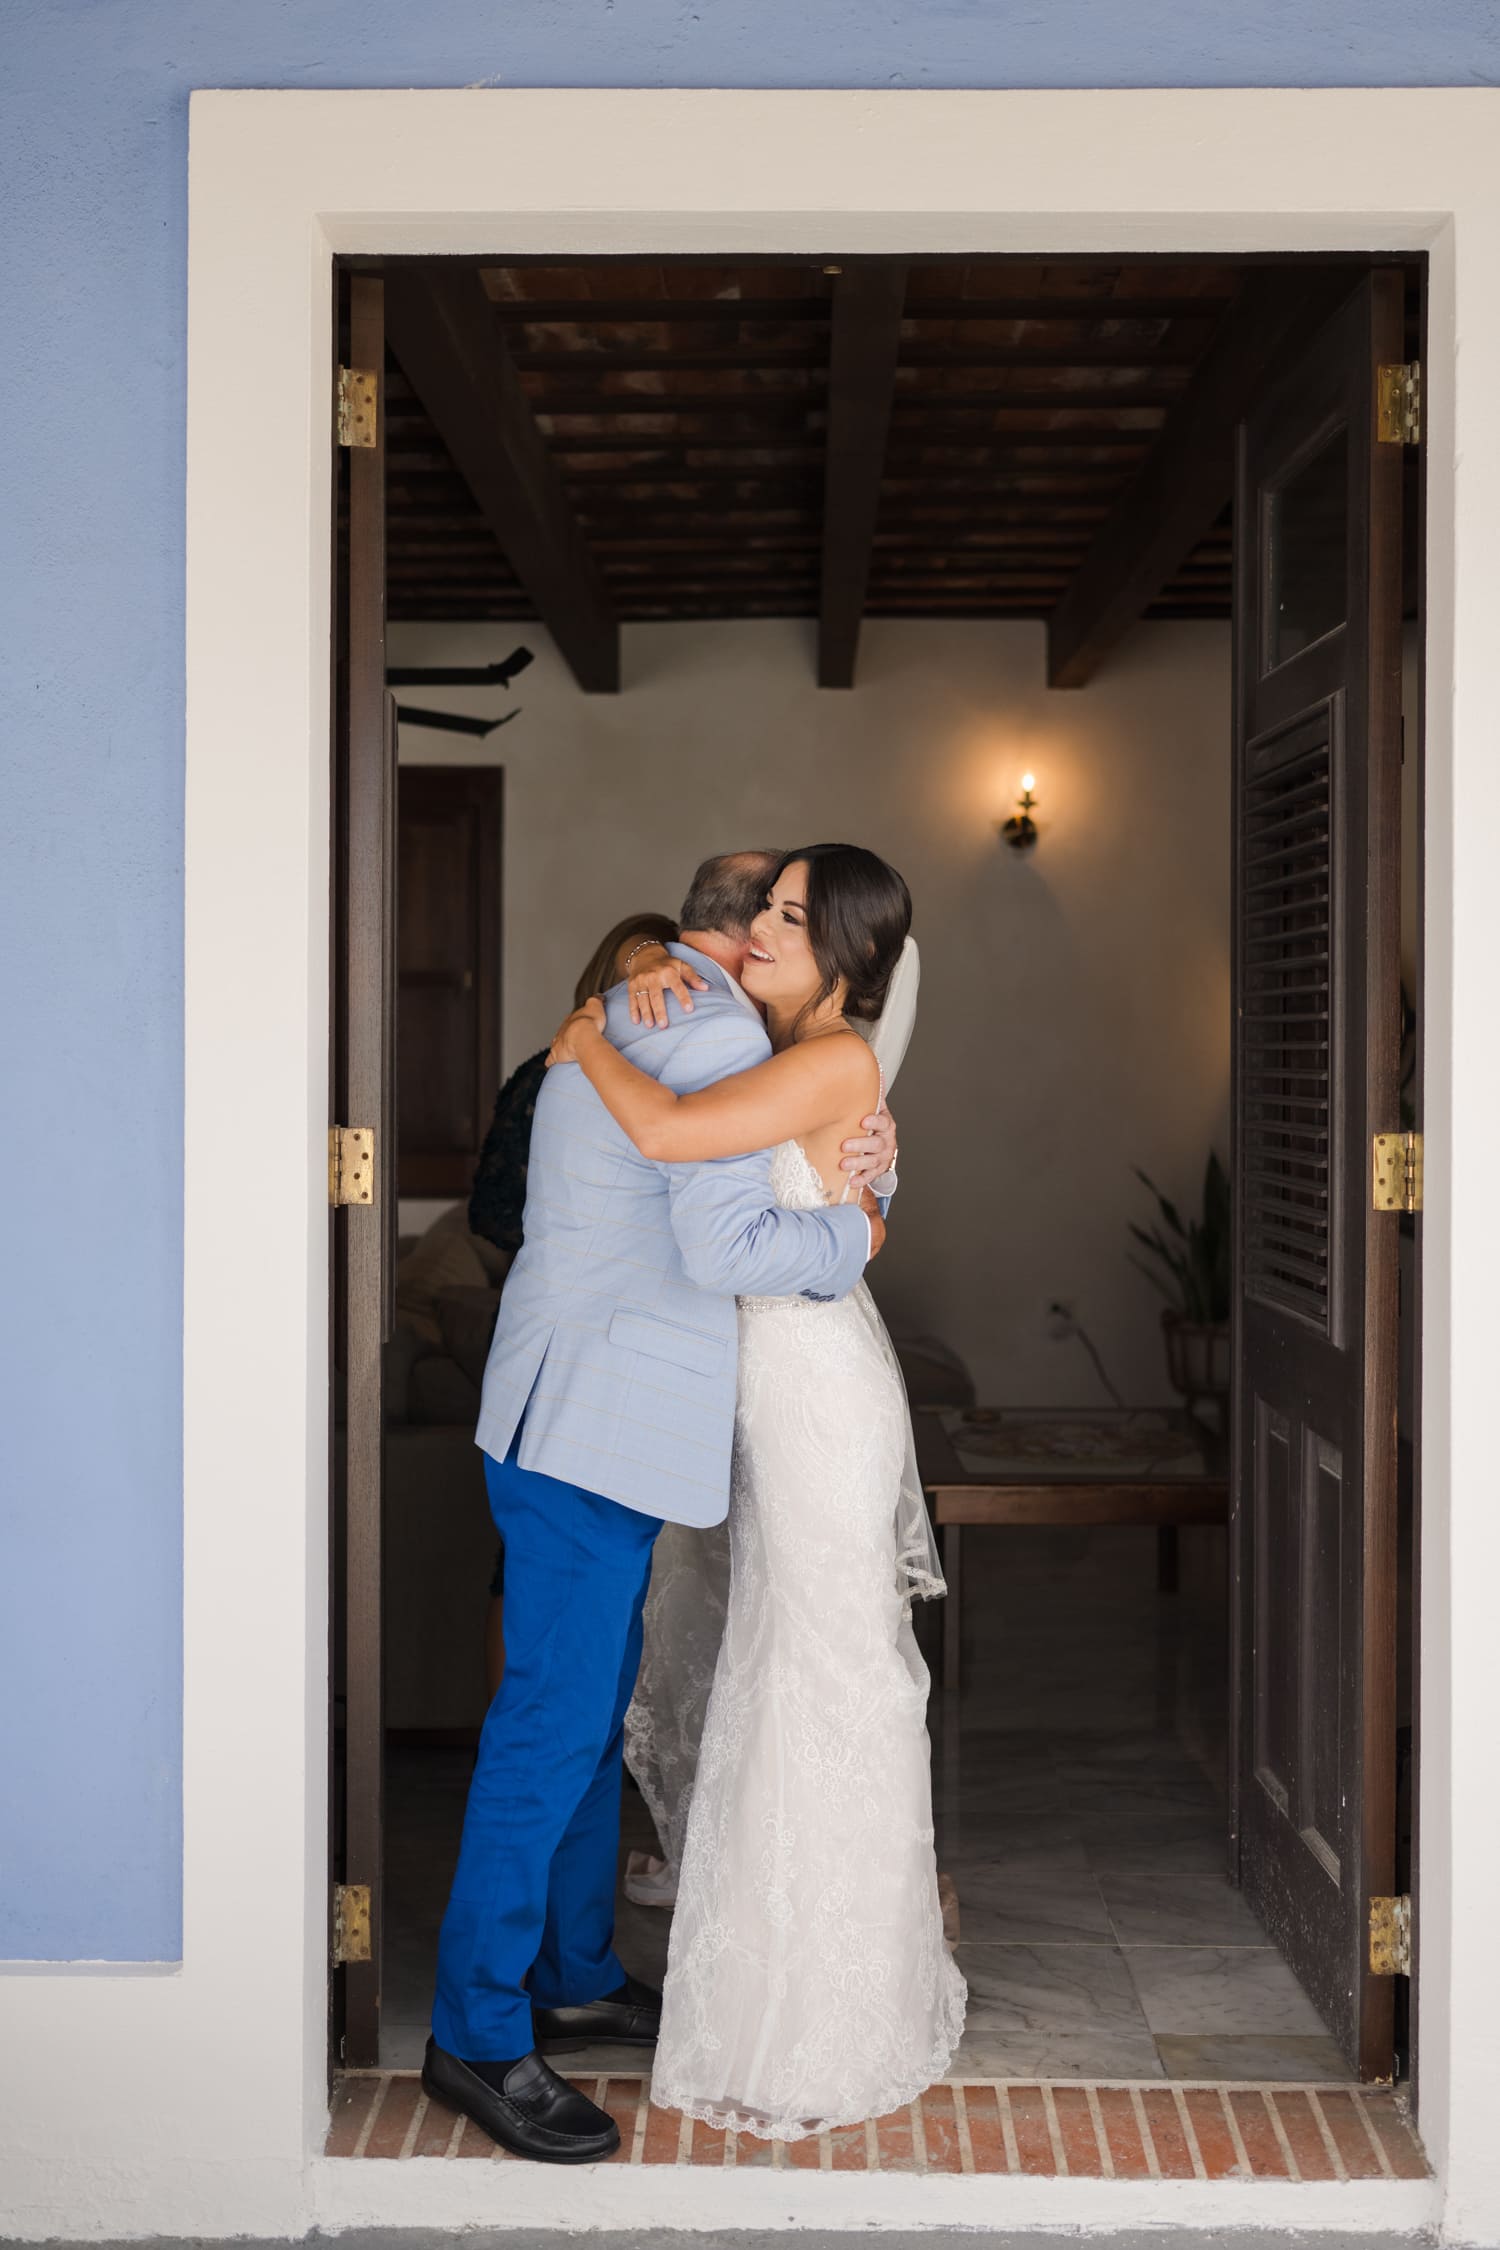 Old San Juan airbnb wedding photography in Puerto Rico